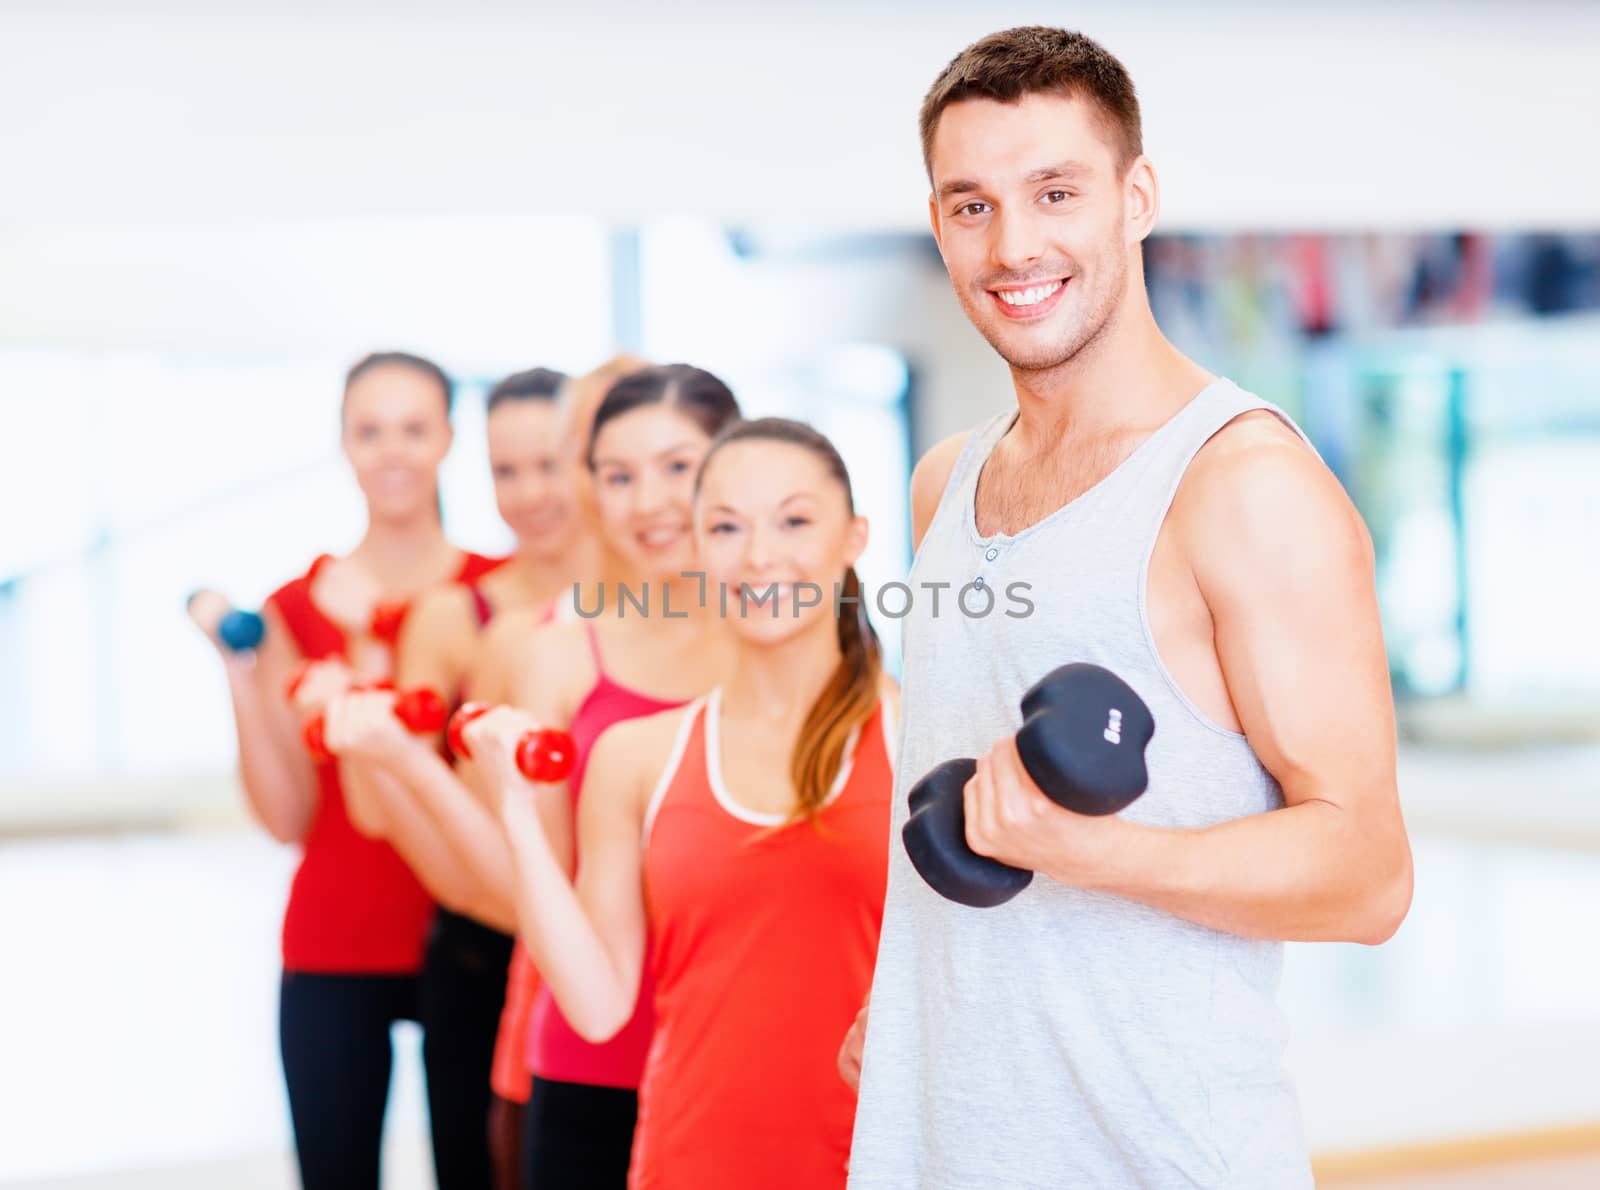 group of smiling people with dumbbells in the gym by dolgachov